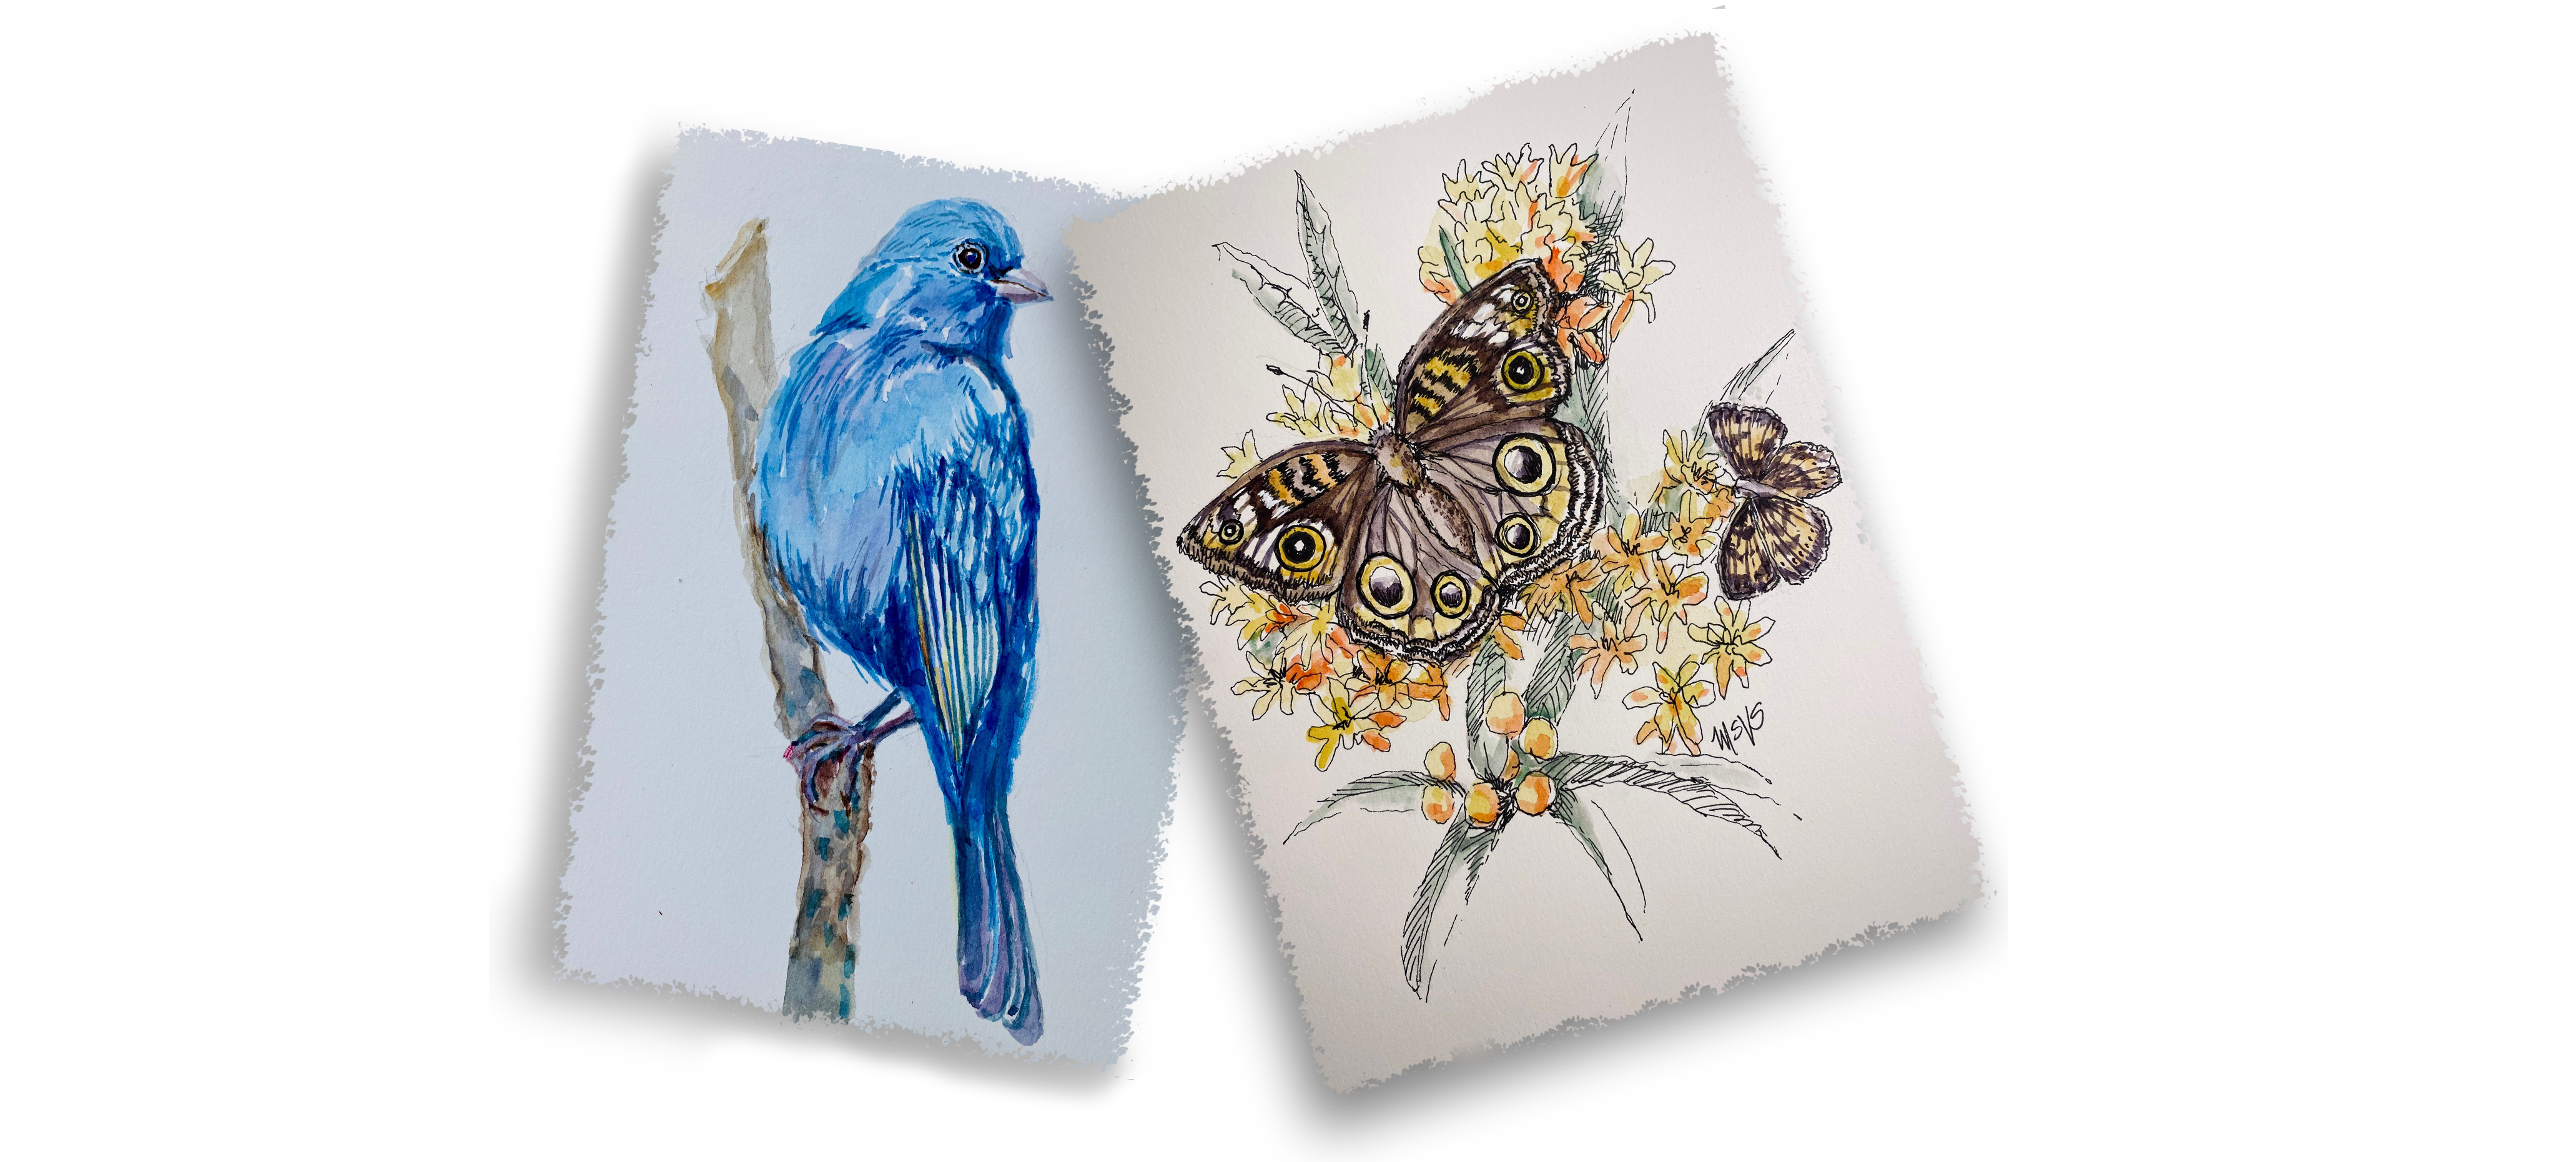 Paintings of bird and moth